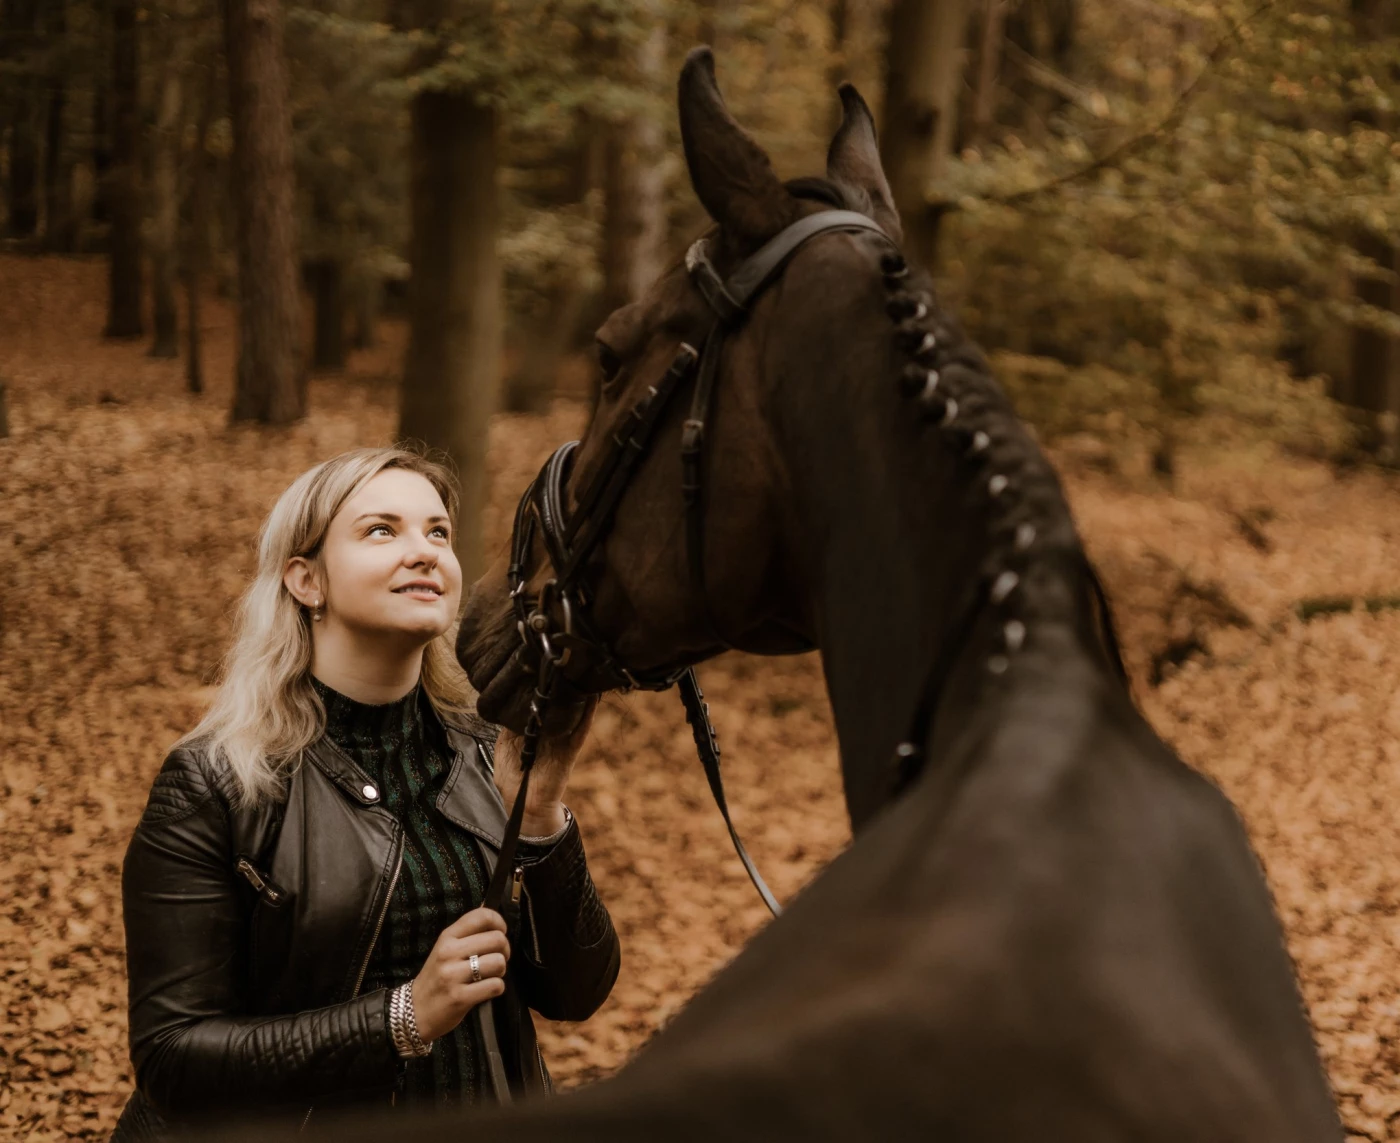 The connection between horse and human is something magical.